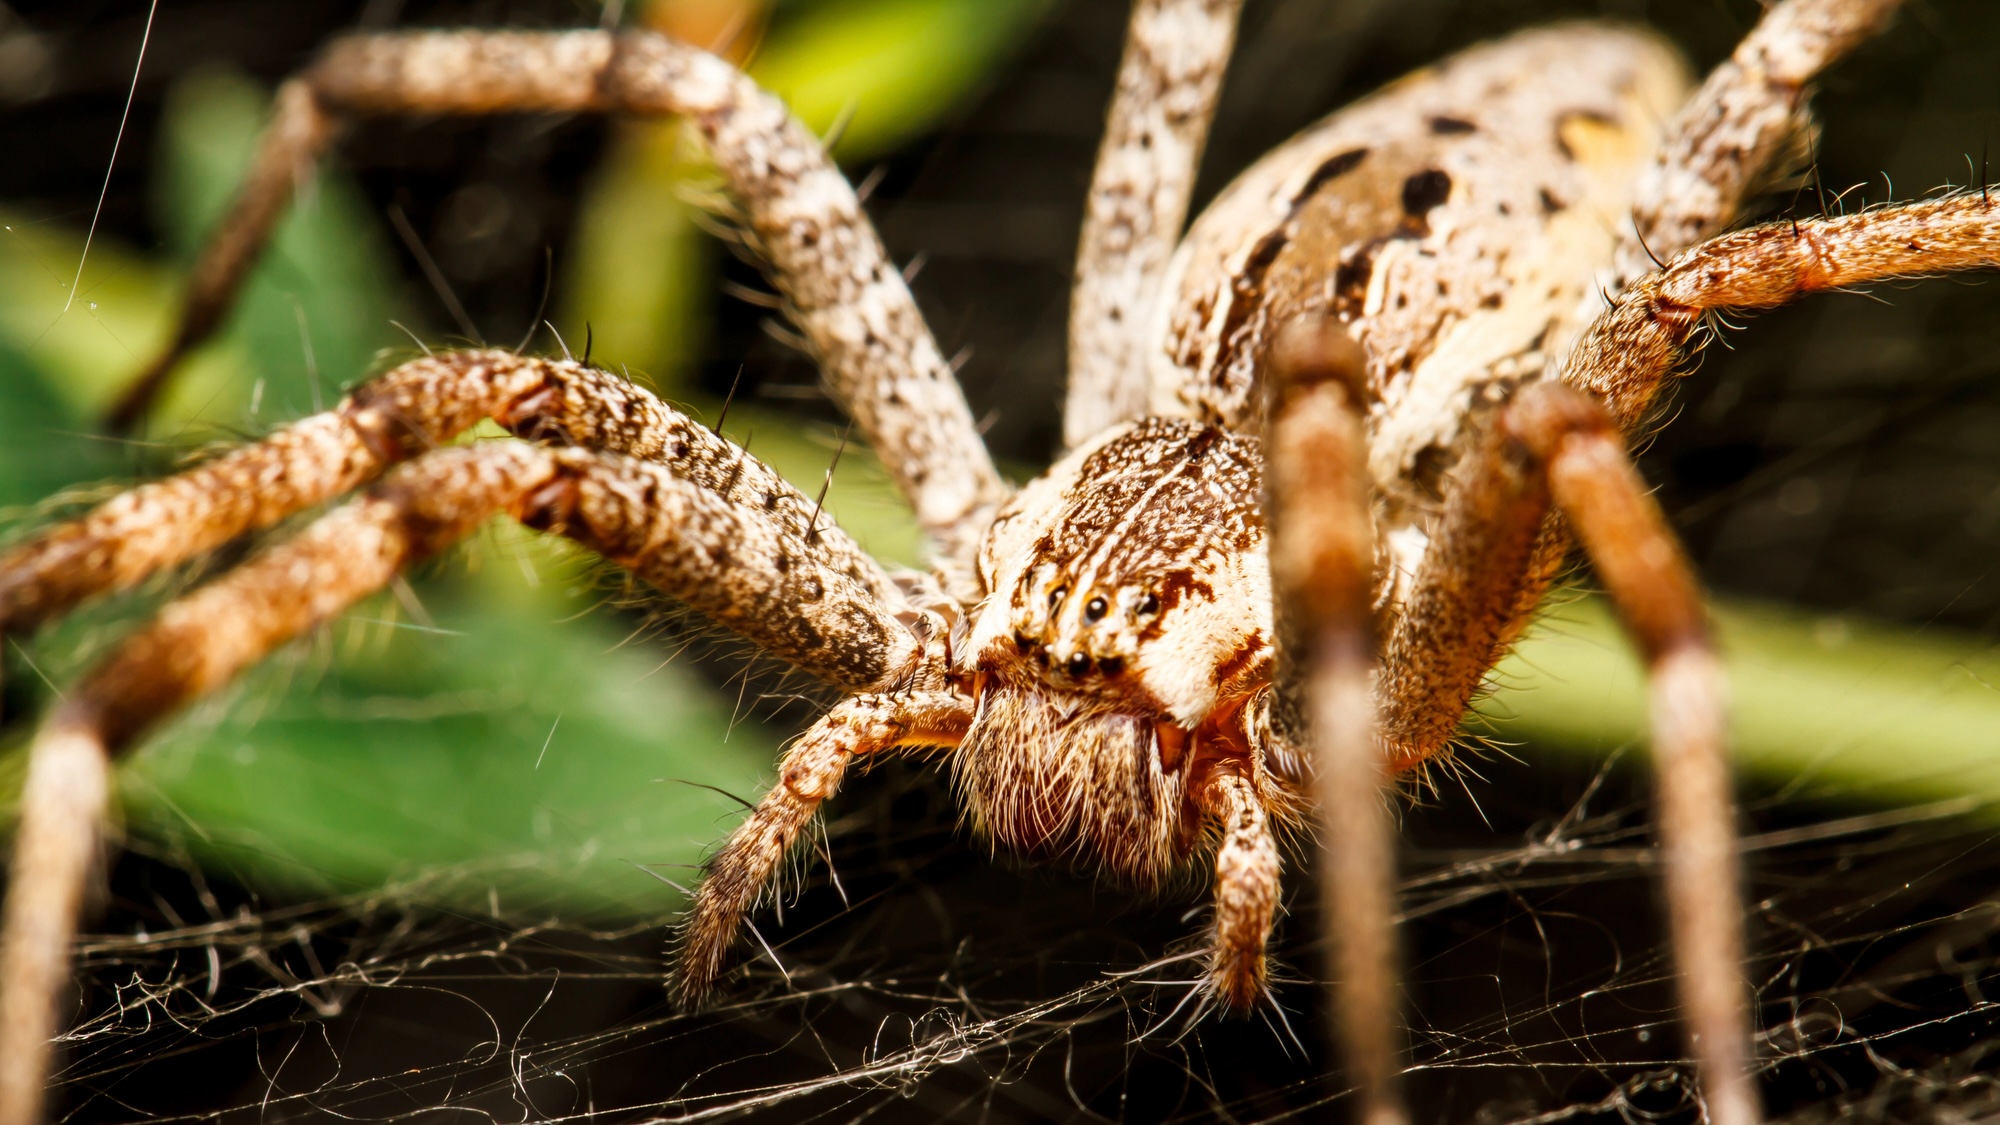 Close up of wolf spider resting on web